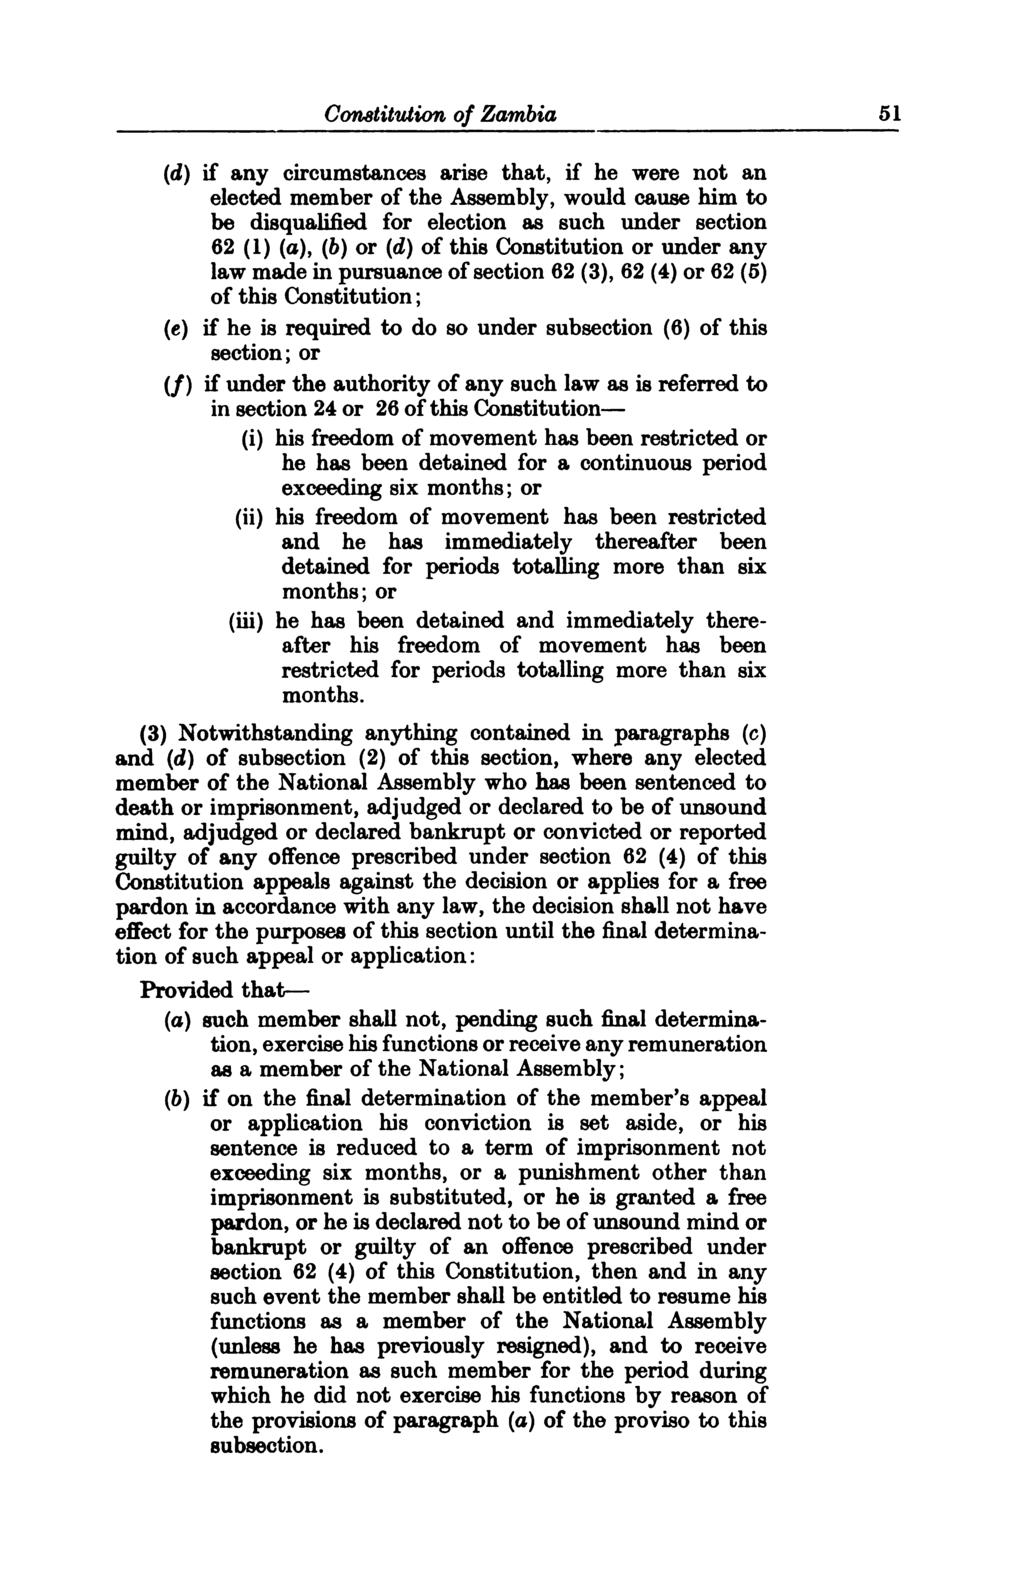 Constitution of Zambia 51 (d) if any circumstances arise that, if he were not an elected member of the Assembly, would cause him to be disqualified for election as such under section 62 (1), (6) or